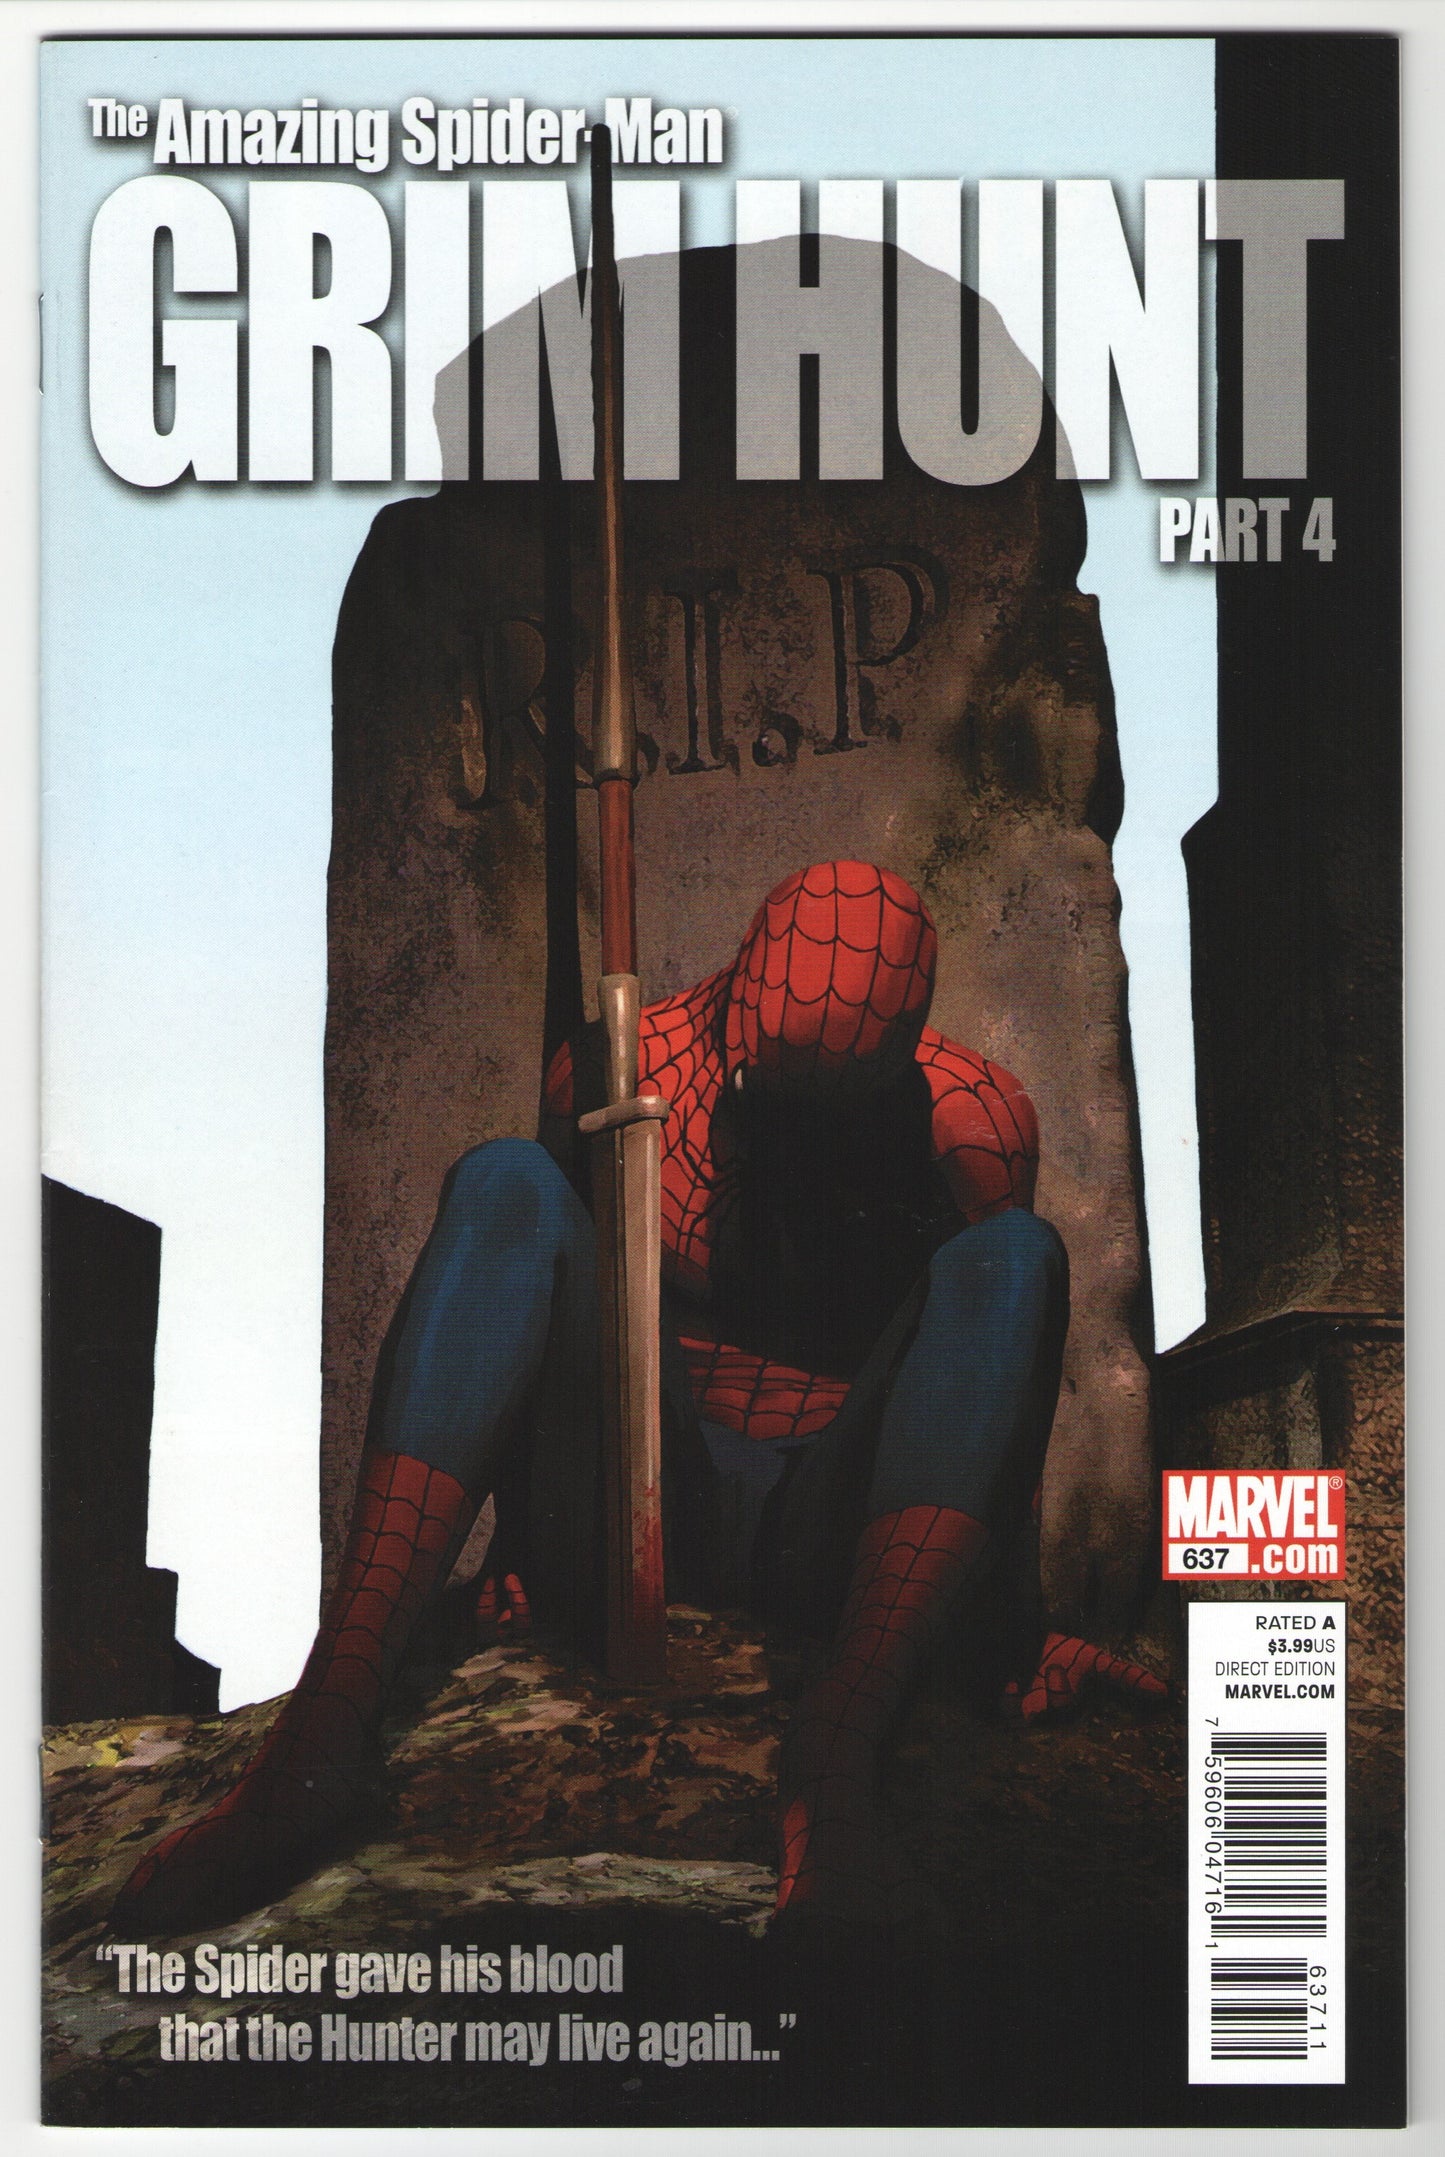 Amazing Spider-Man Issues #634-637 "Grim Hunt" Complete Story Arc (2010)